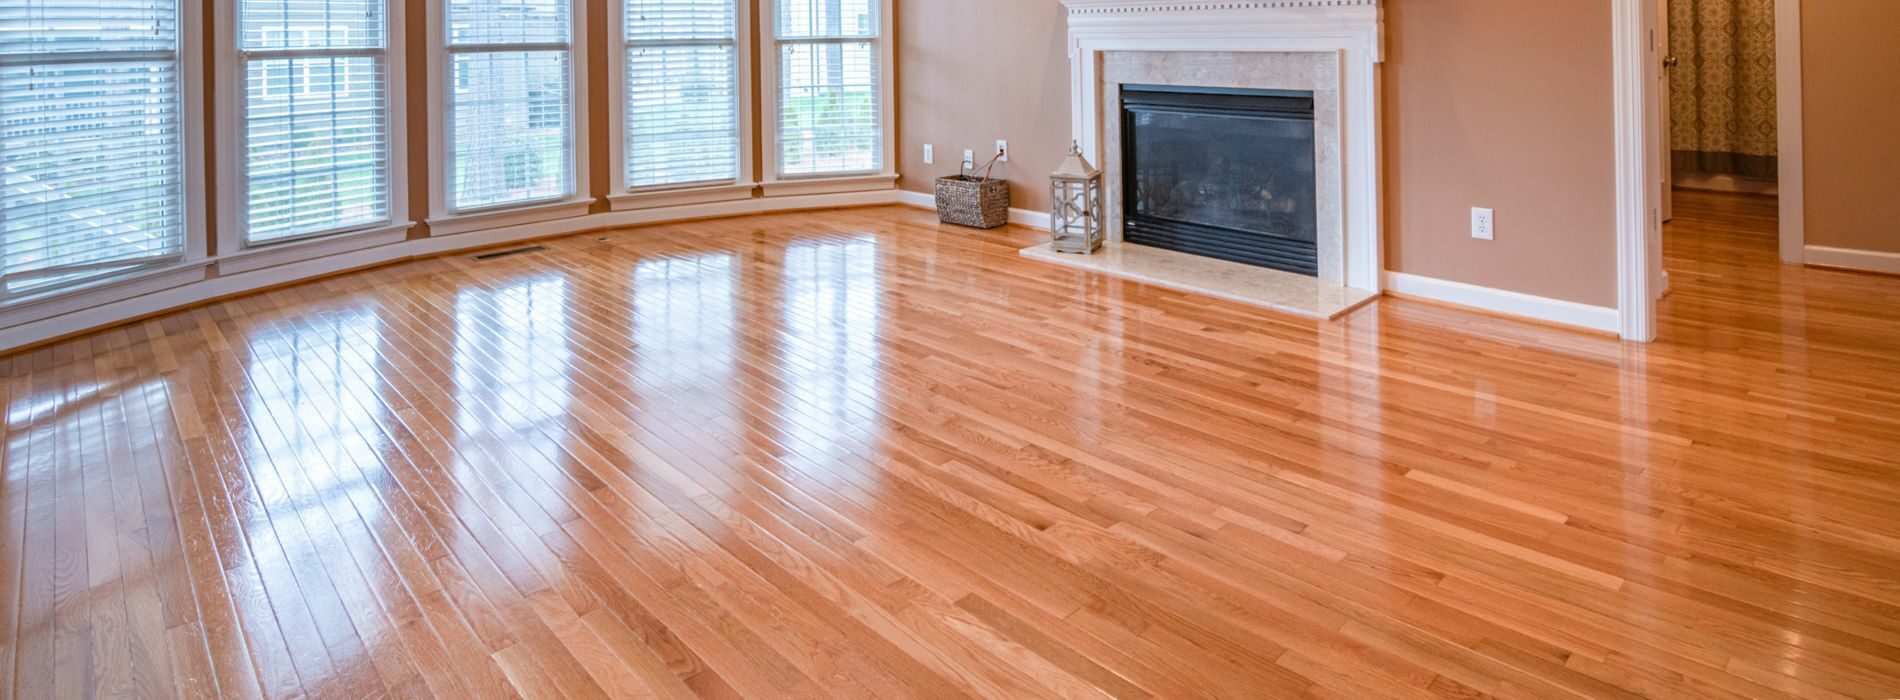 Expertly restored 7-year-old hardwood floor in Whitton, TW2. Bona 2K Frost whitewashing and Traffic HD 15% sheen matte lacquer were used by Mr Sander®. The durable and stunning finish ensures long-lasting beauty.